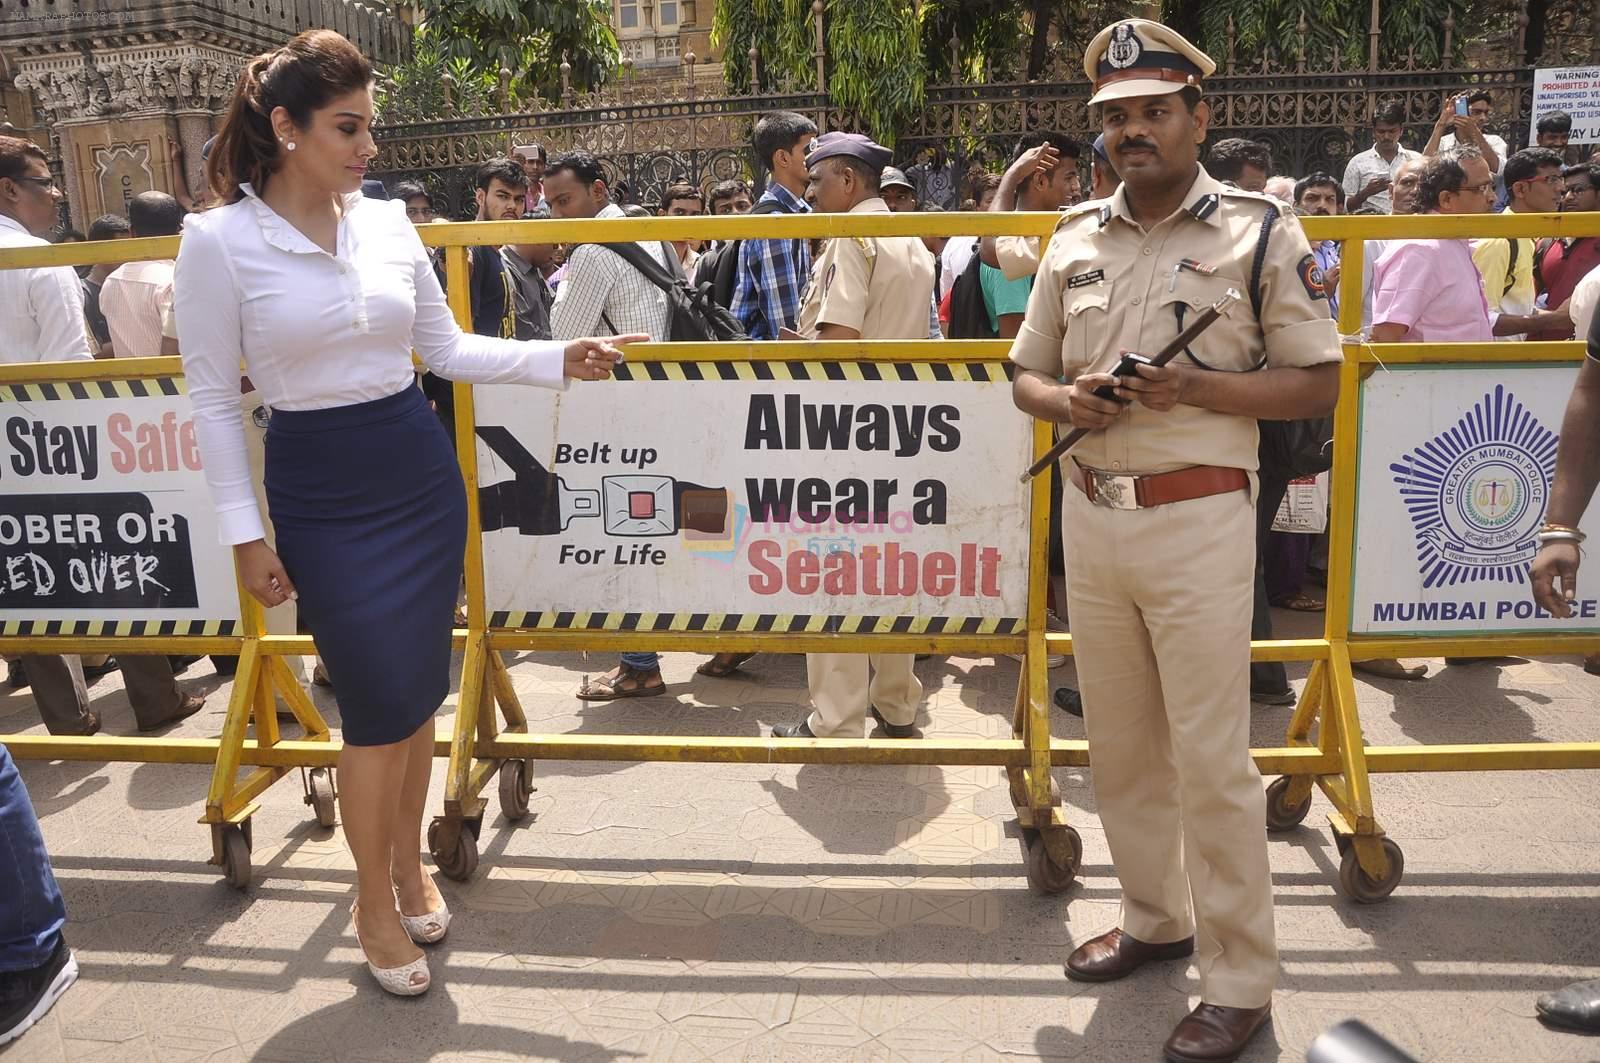 Raveena Tandon at wear helmet promotions in VT on 14th July 2015